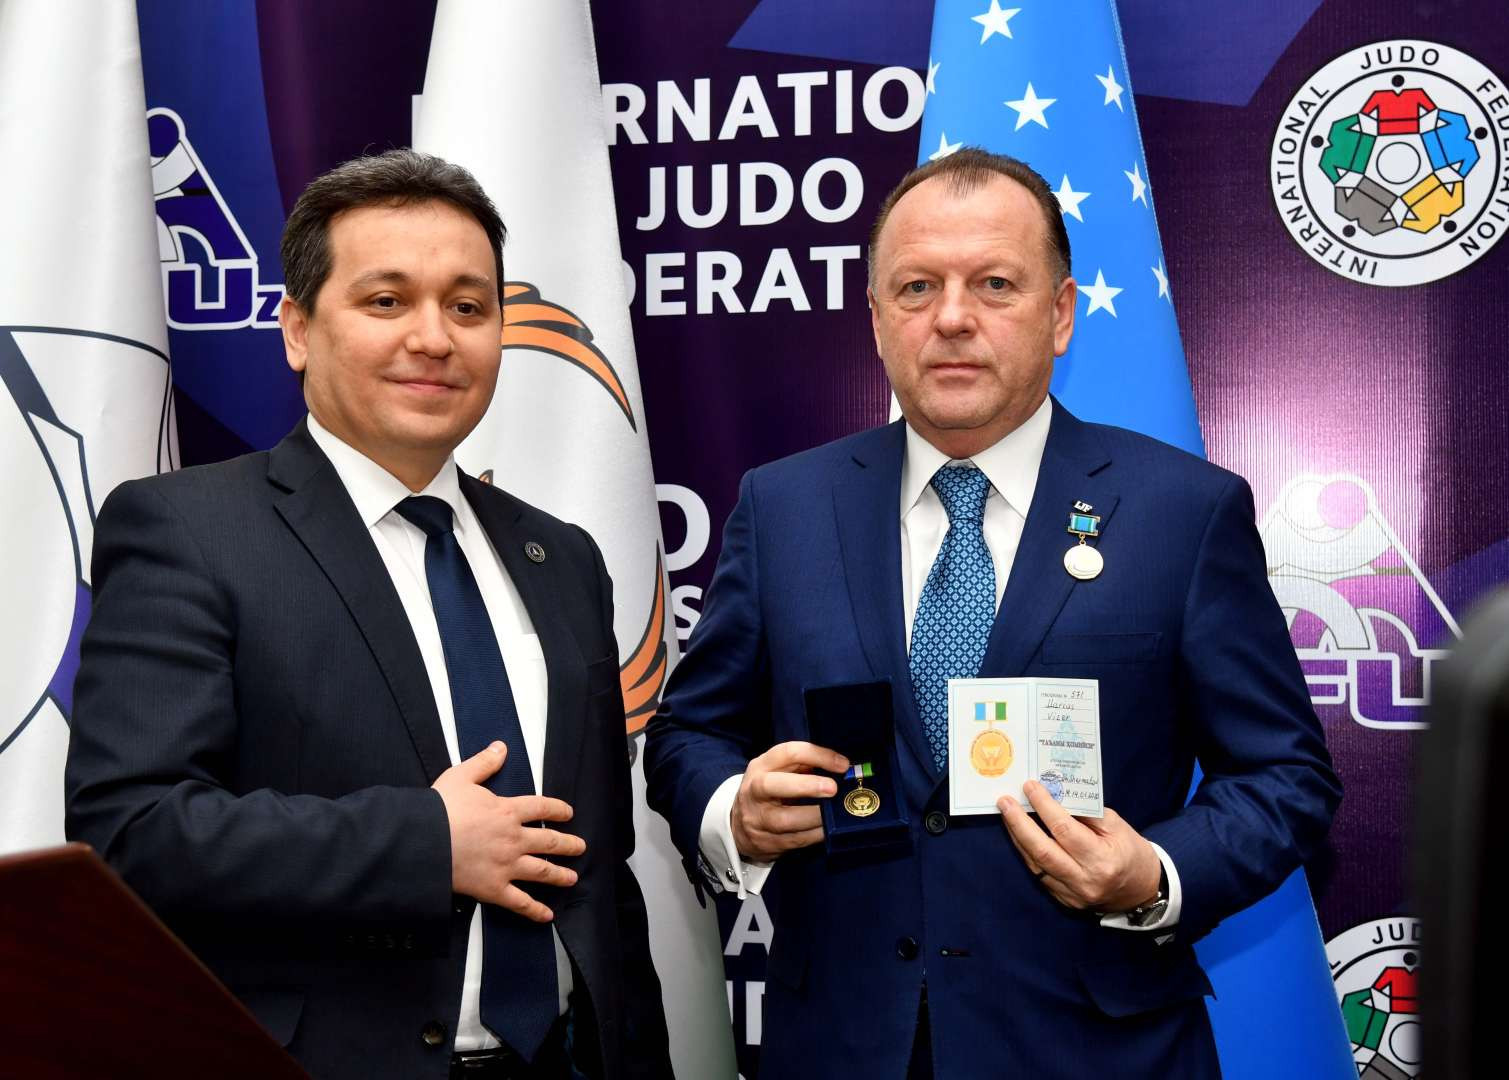 IJF President Marius Vizer, right, was awarded the Award of Sponsor of Education by Uzbekistan's Education Minister Sherzod Shermatov after announcing an expansion of the 